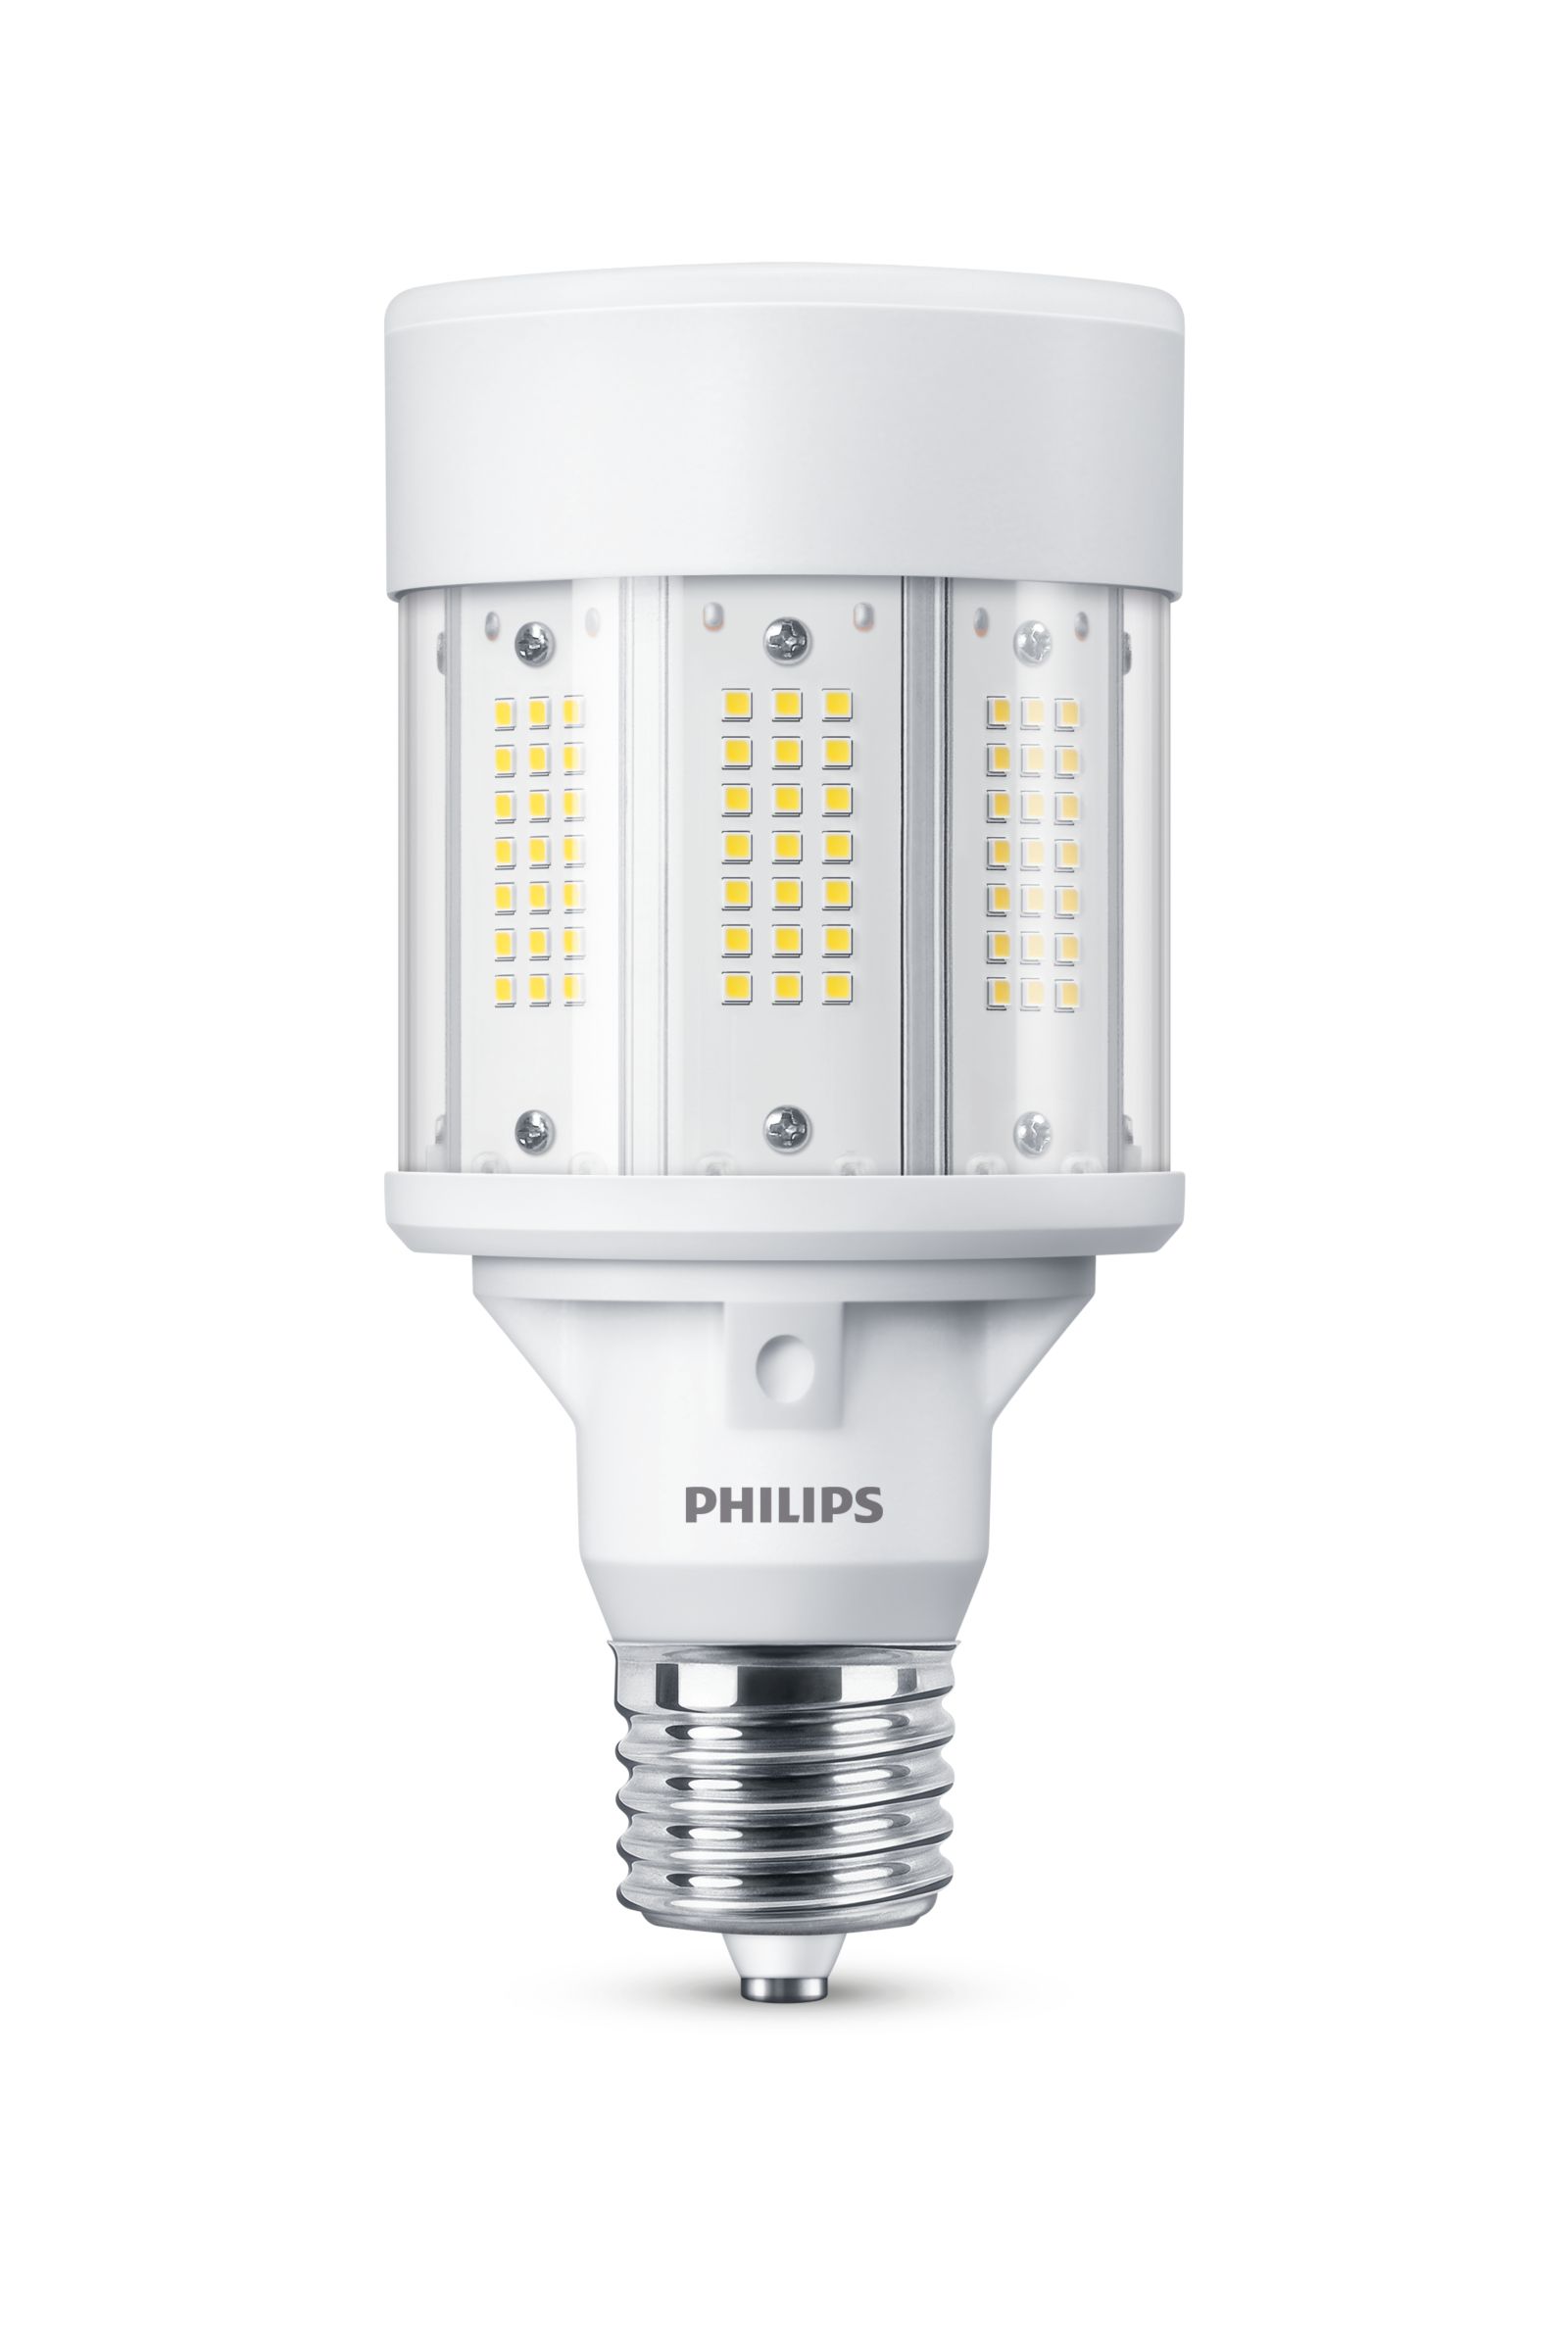 LED HID replacement | Philips lighting